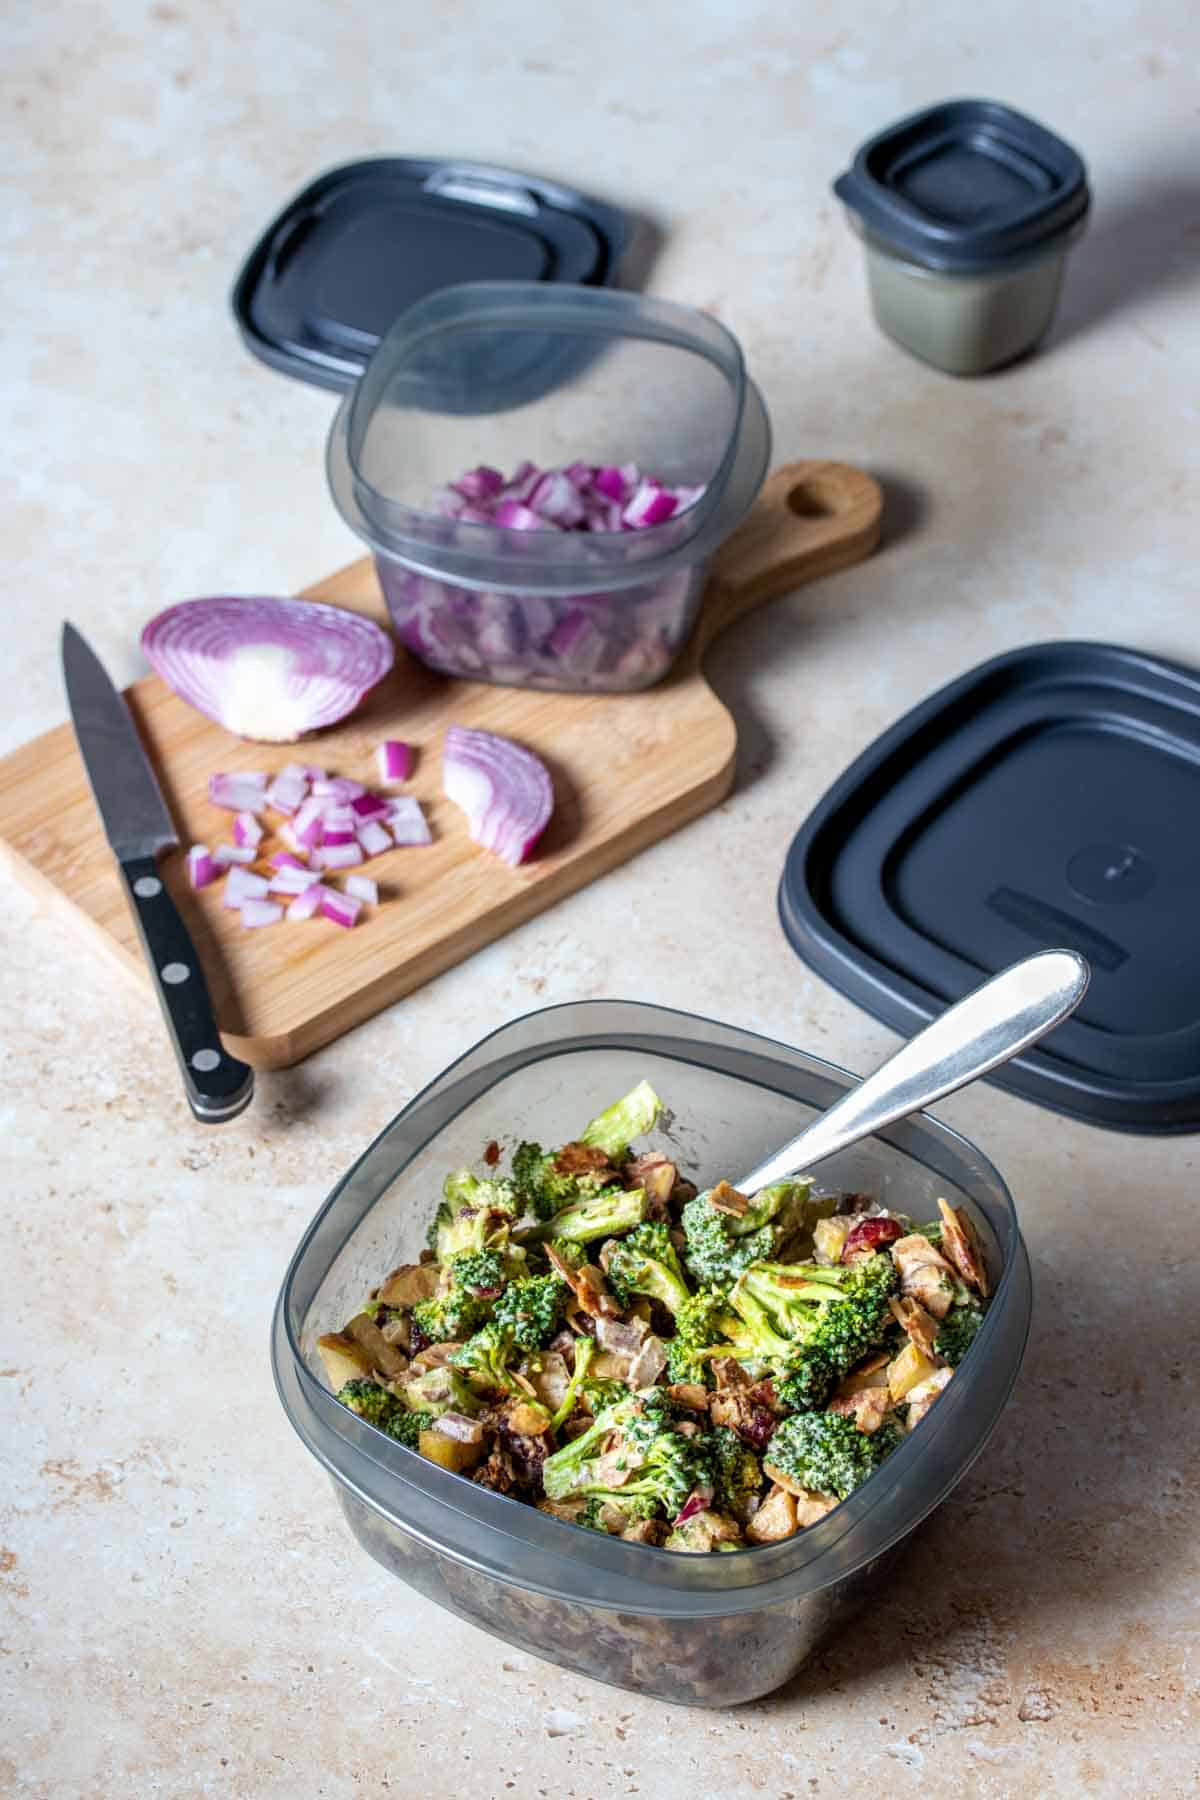 A grey plastic container filled with broccoli salad on a tan surface in front of a smaller container with chopped red onion.